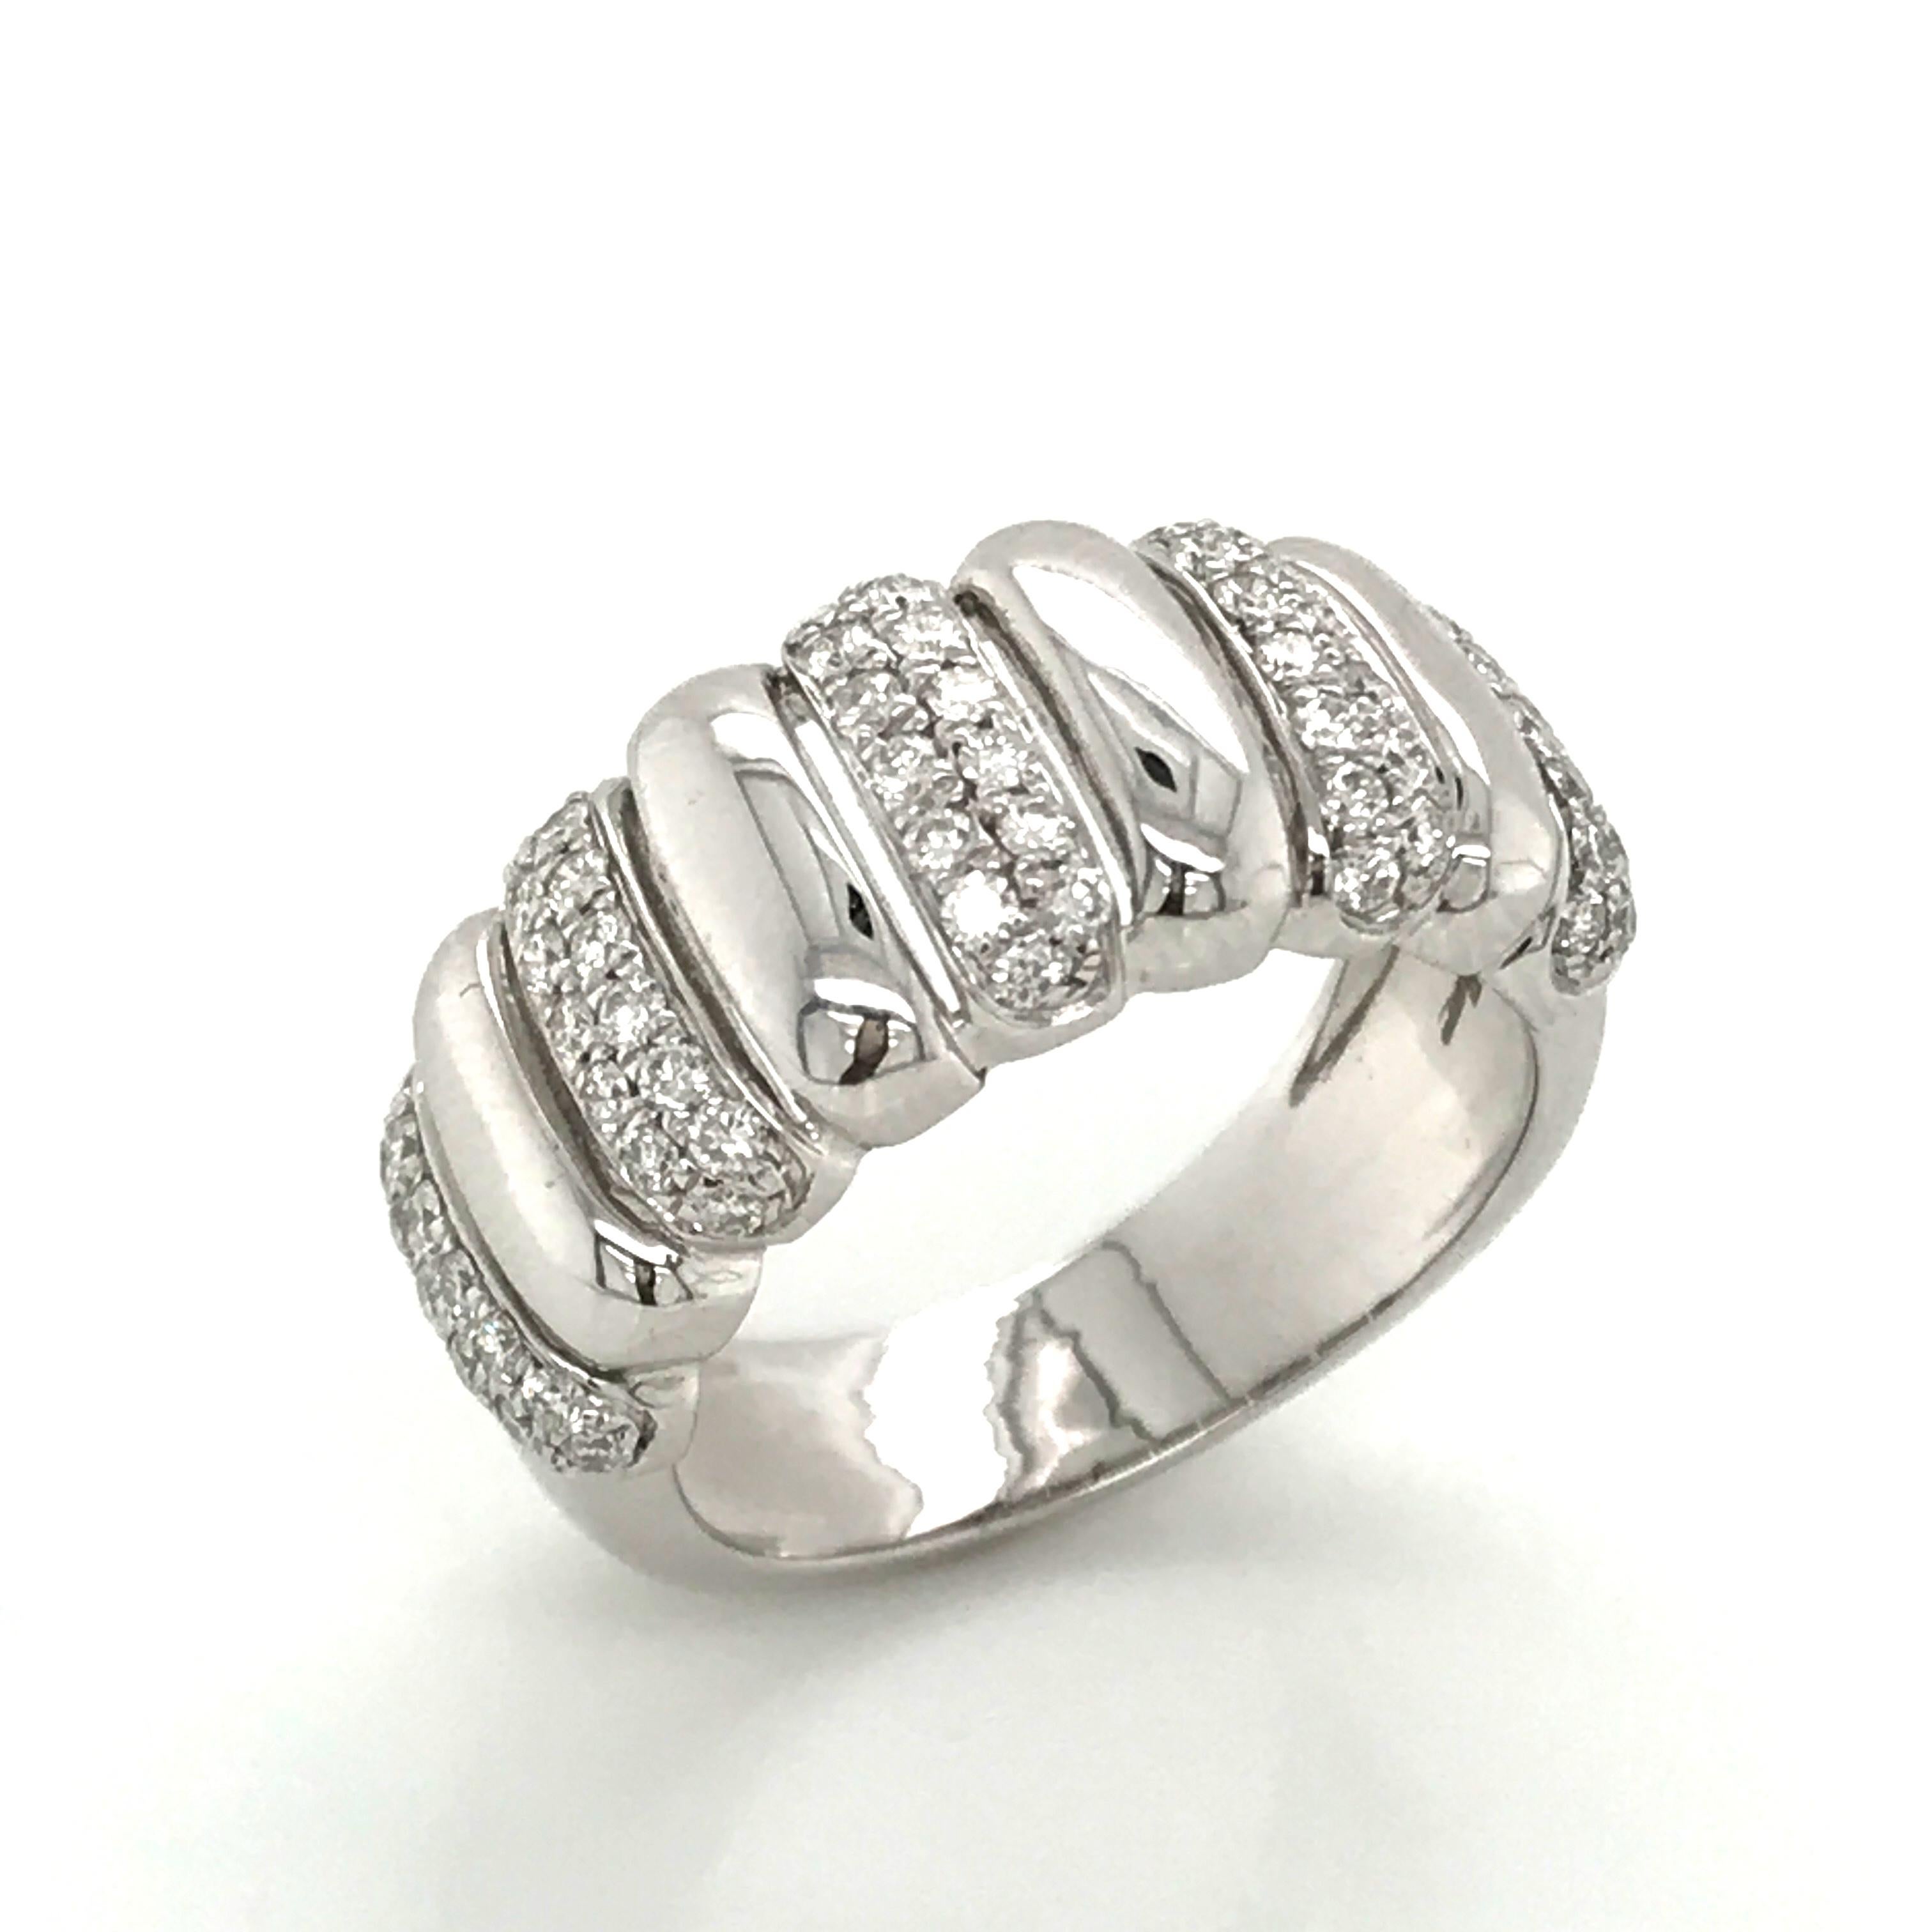 A Color H Diamond Cocktail Ring on a delicate 18k White Gold band. This refined and prestigious piece brings together 65 sparkling Diamonds of an elegant H color and exceptional SI clarity, totaling an impressive 0.650 carat weight. These beautiful